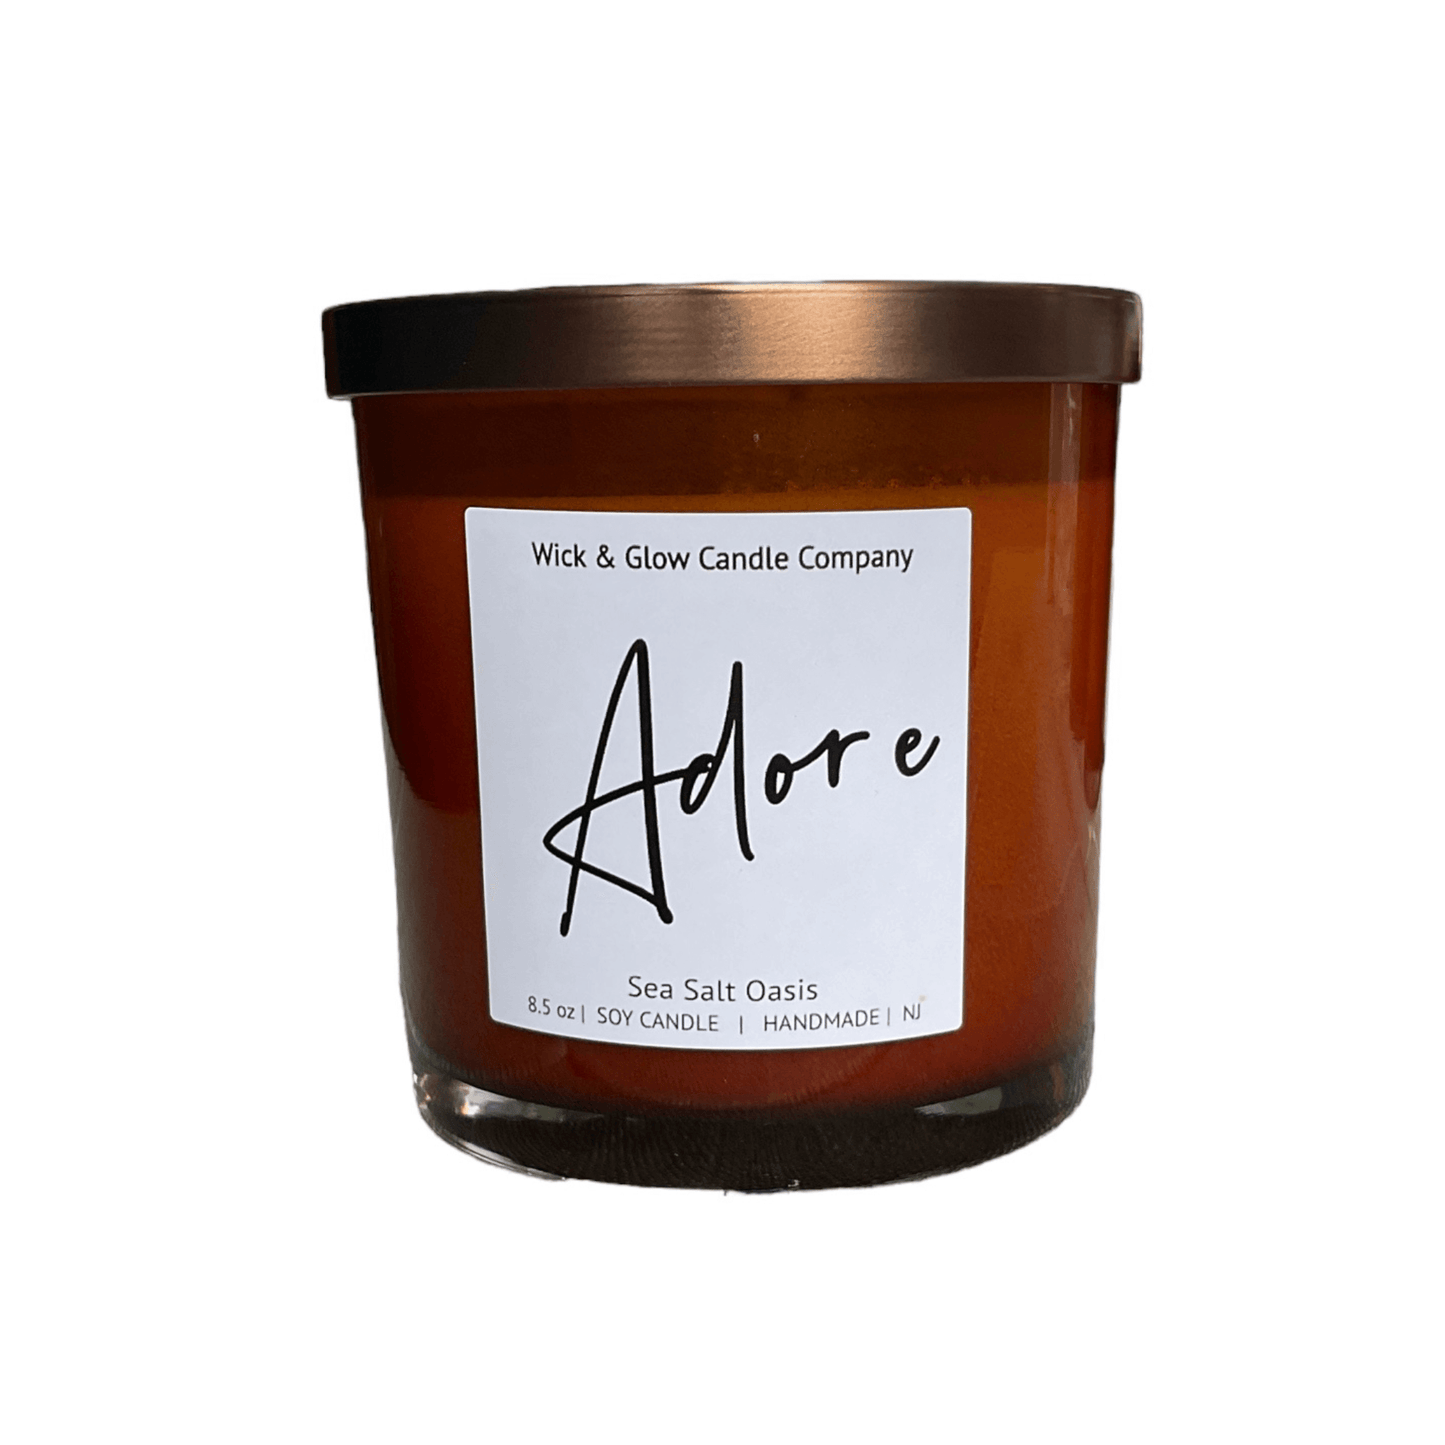 Candle in brown jar with white label